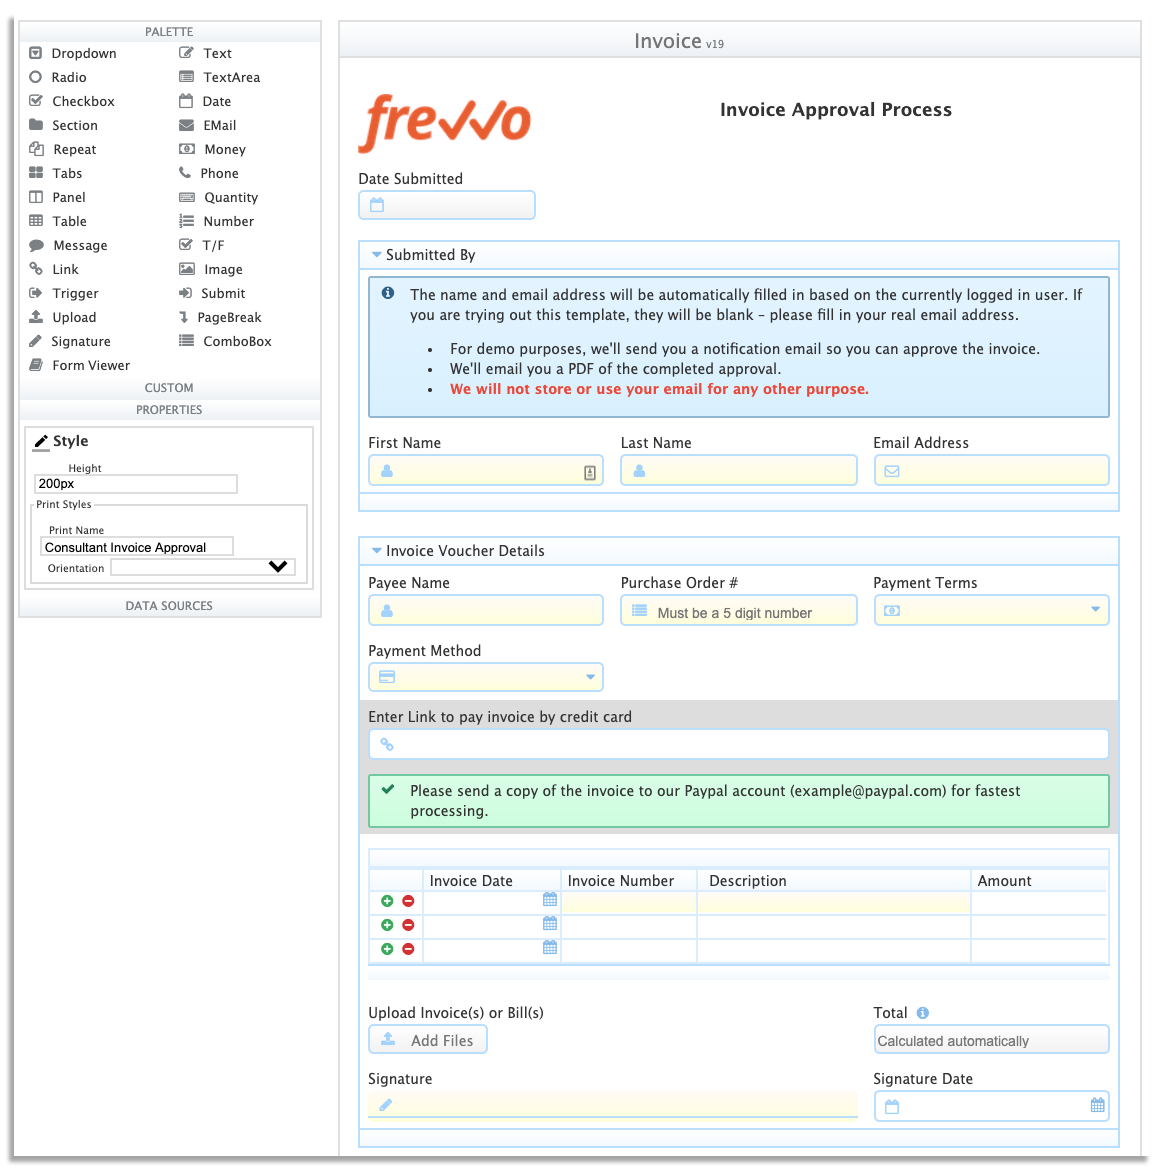 frevvo invoice approval form in the dynamic form builder